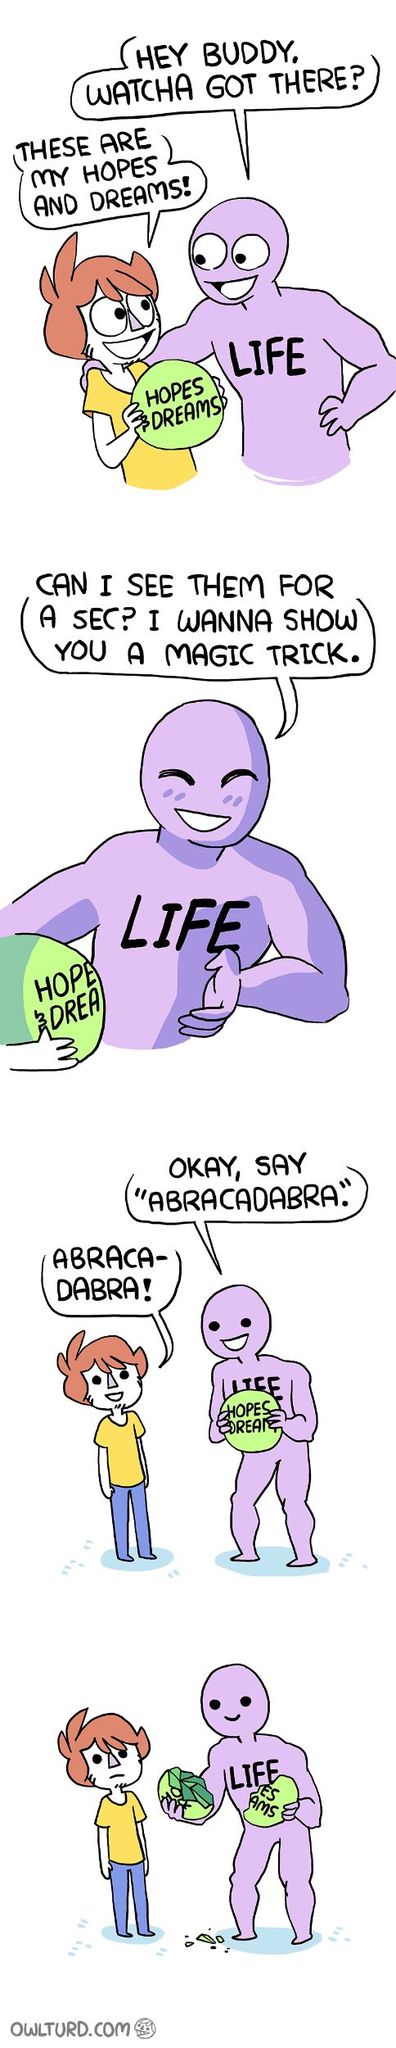 life is awesome - meme